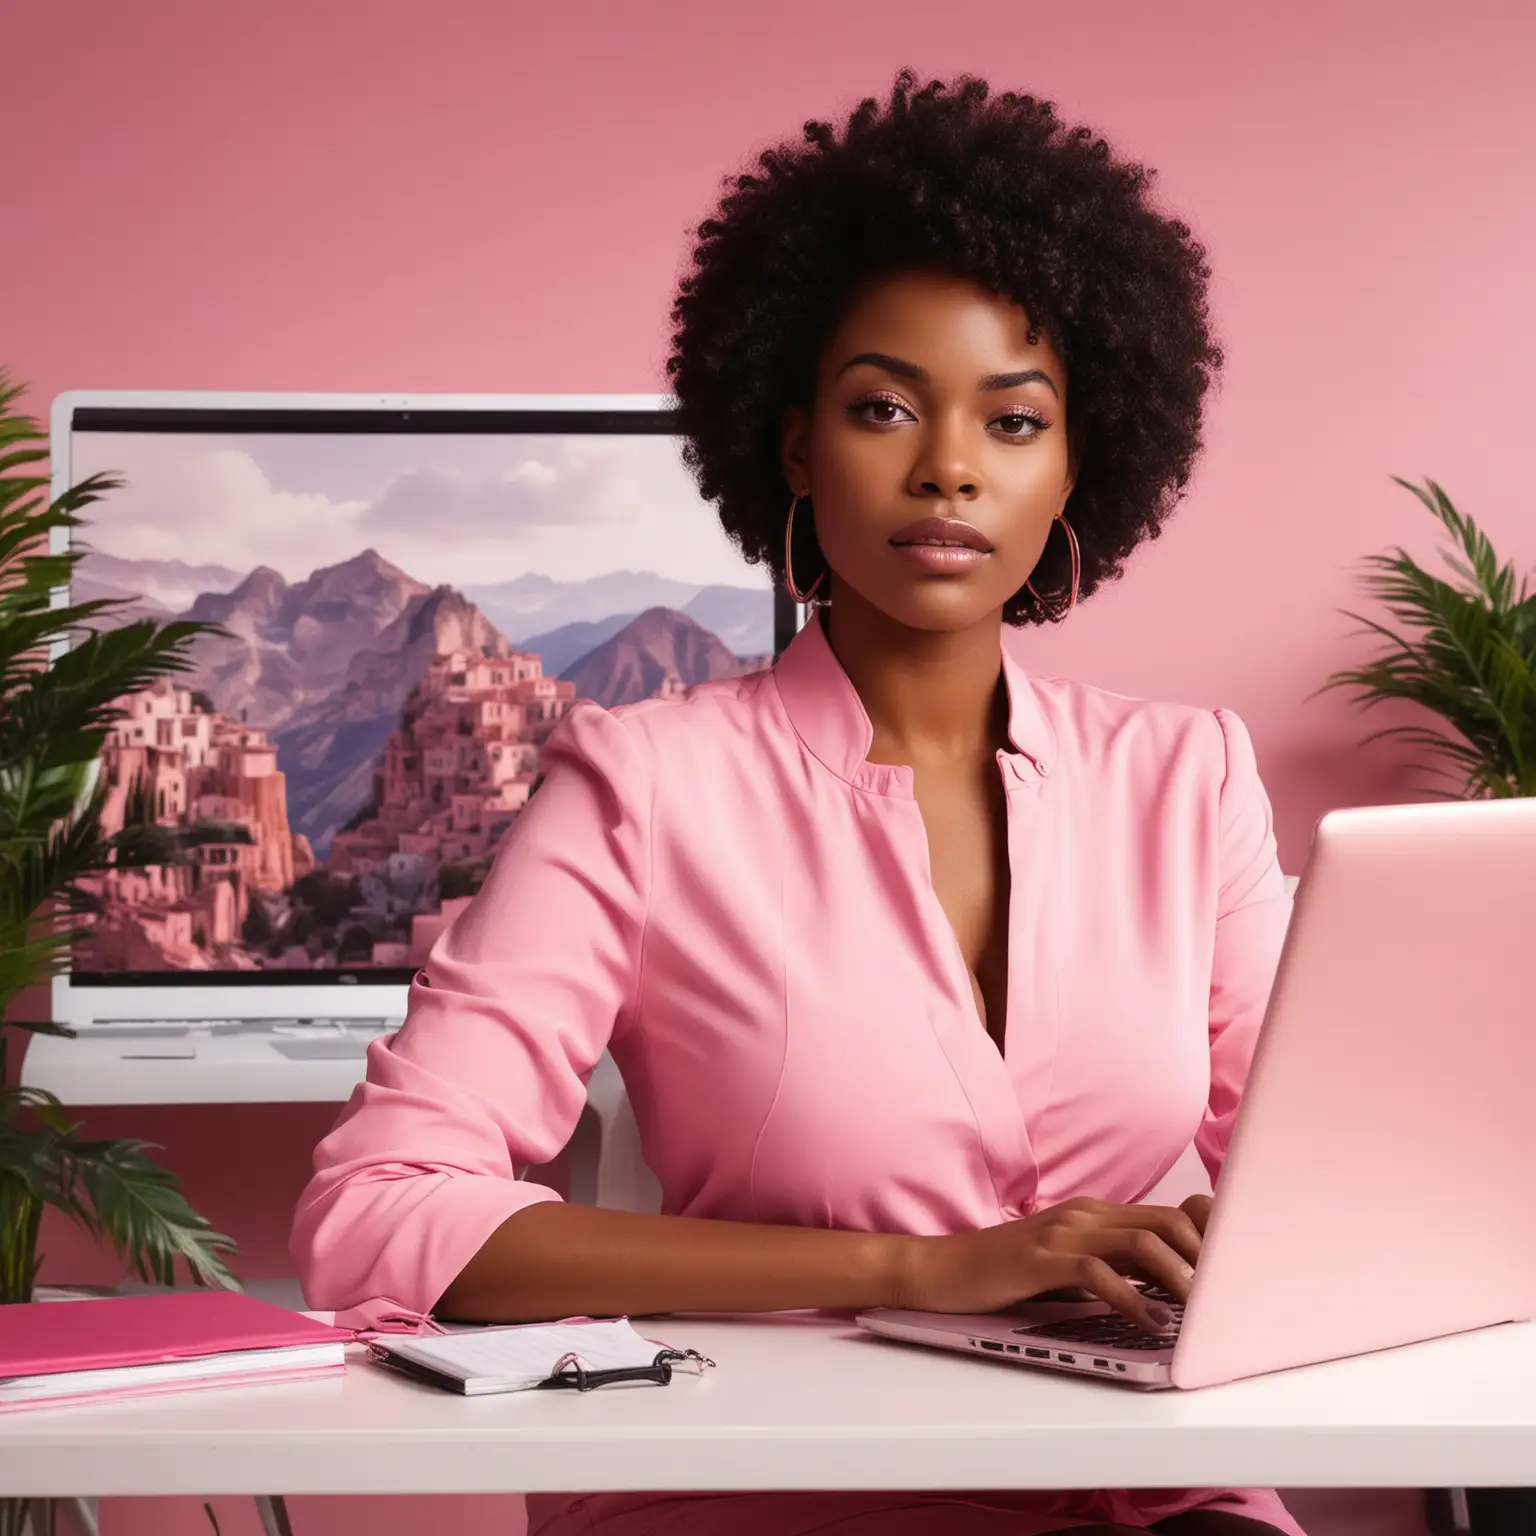 Professional Black Woman Working on Laptop in Luxurious Pink Office